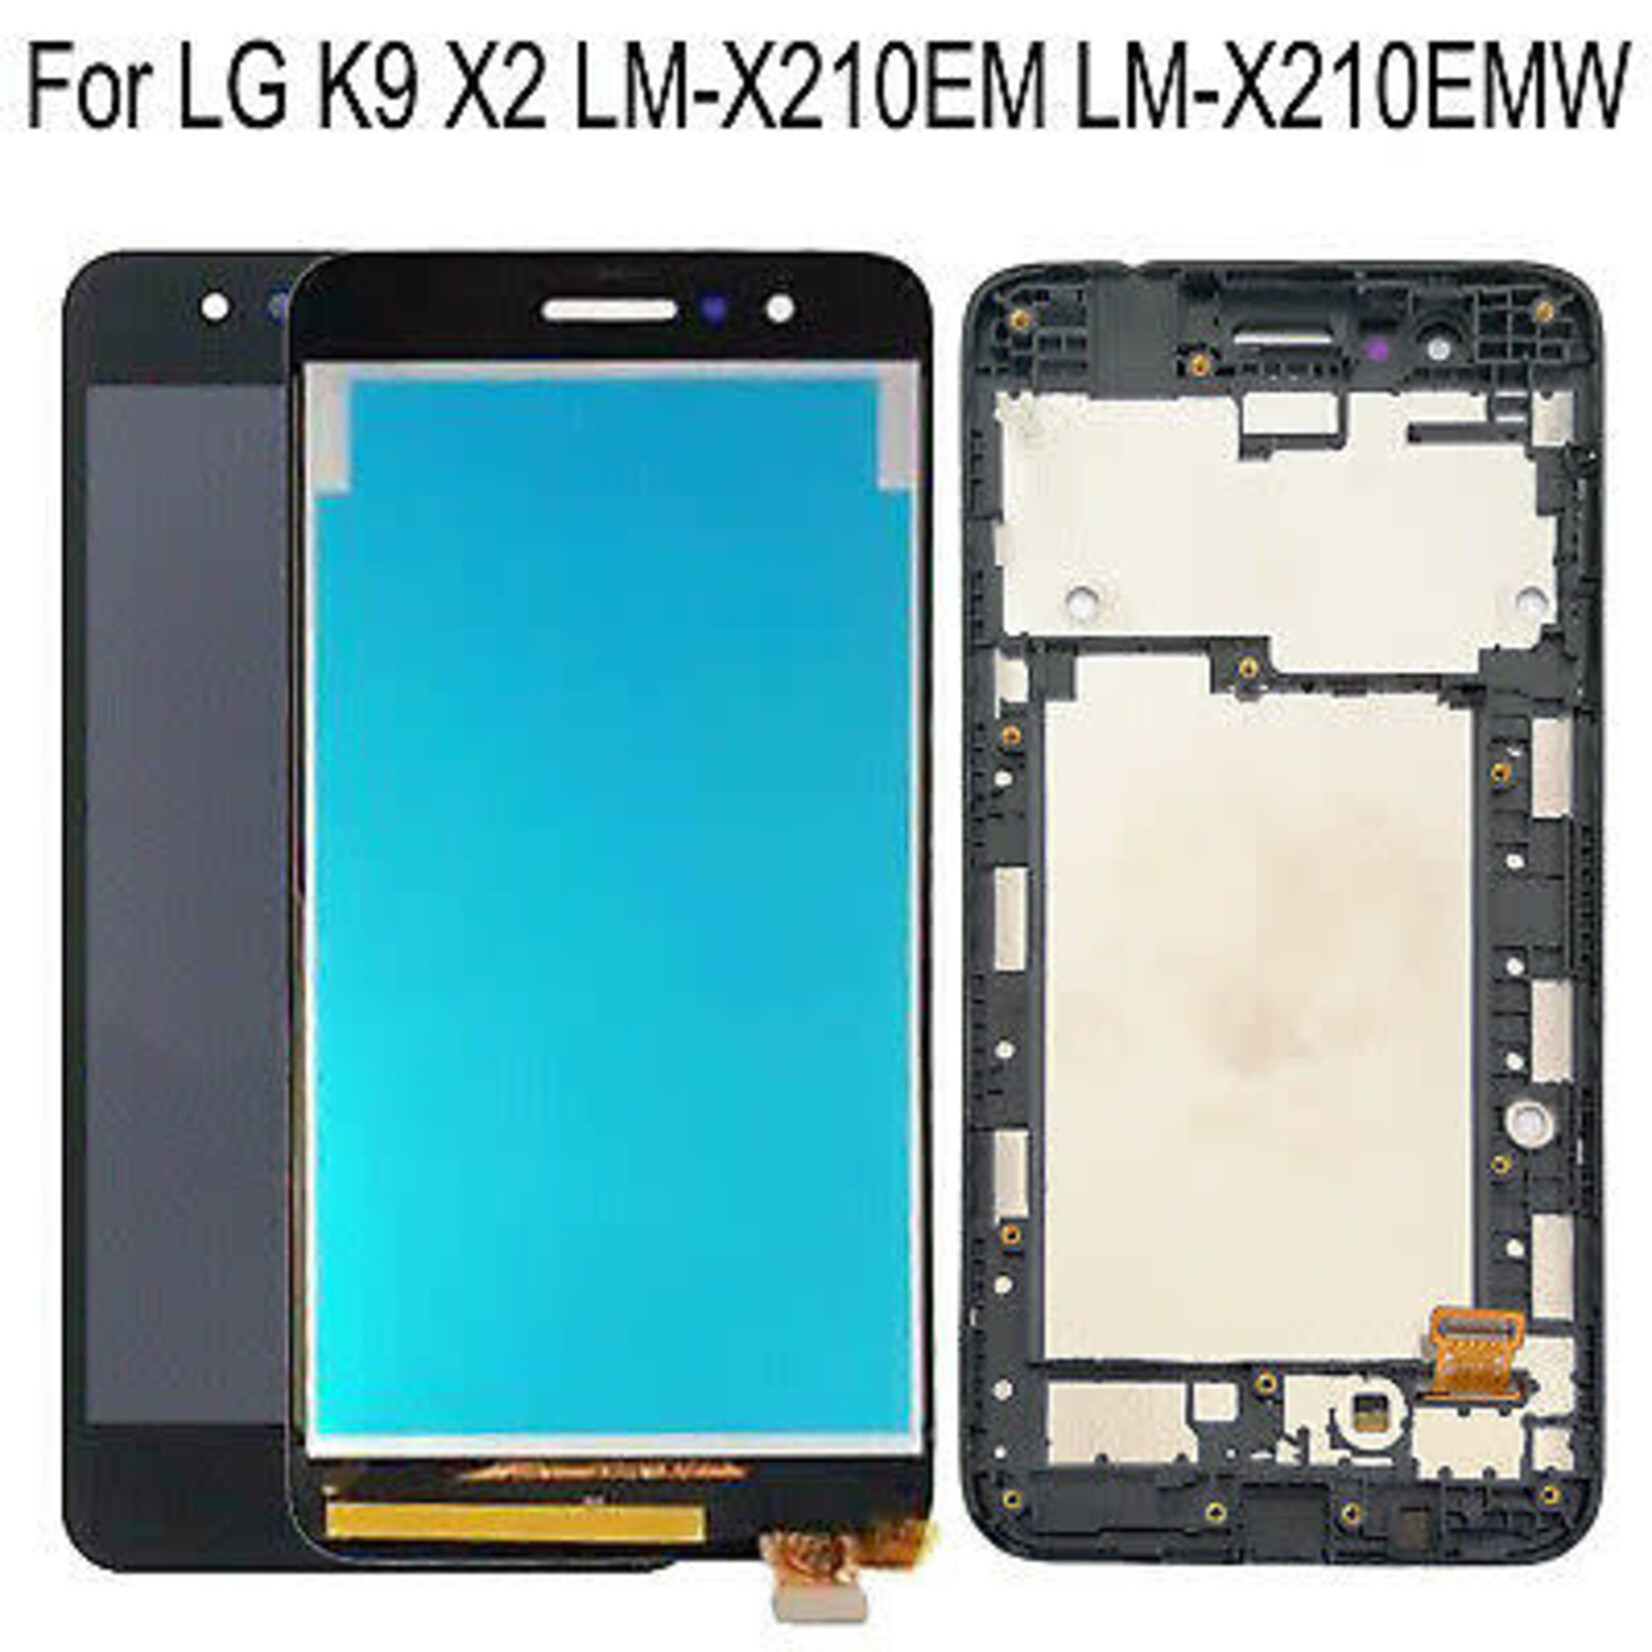 LG LCD DIGITIZER ASSEMBLY with frame LG K9